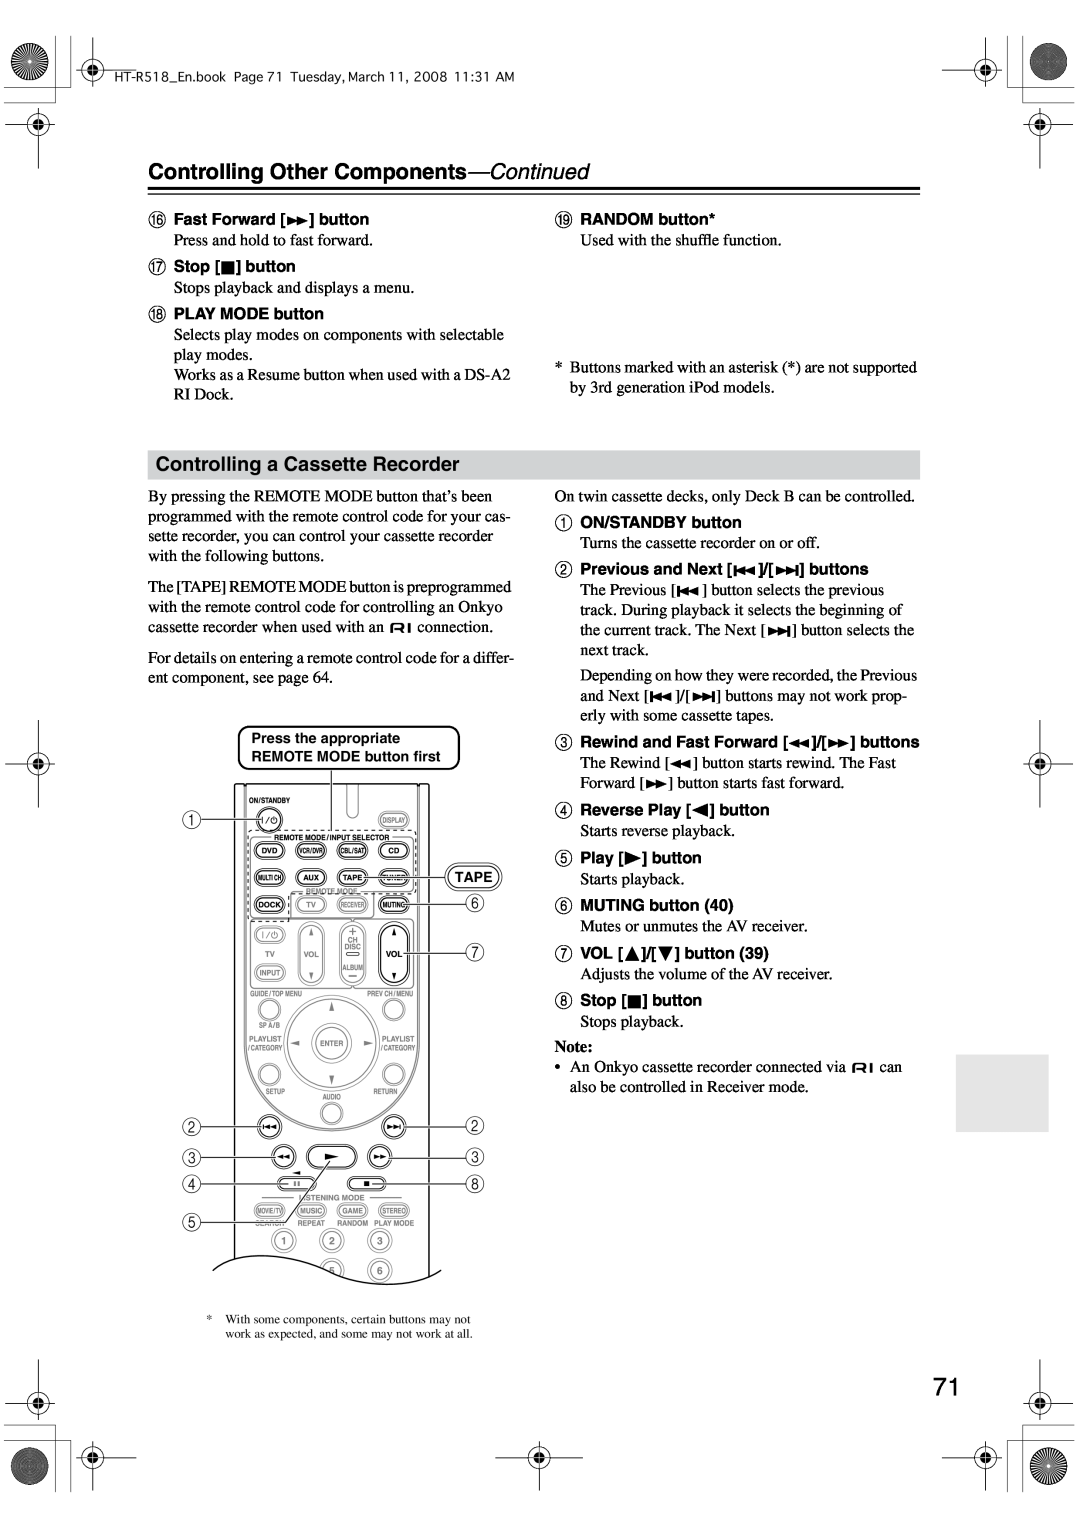 Onkyo HT-R518 instruction manual Controlling a Cassette Recorder, Controlling Other Components-Continued, F G 22 33 4H 